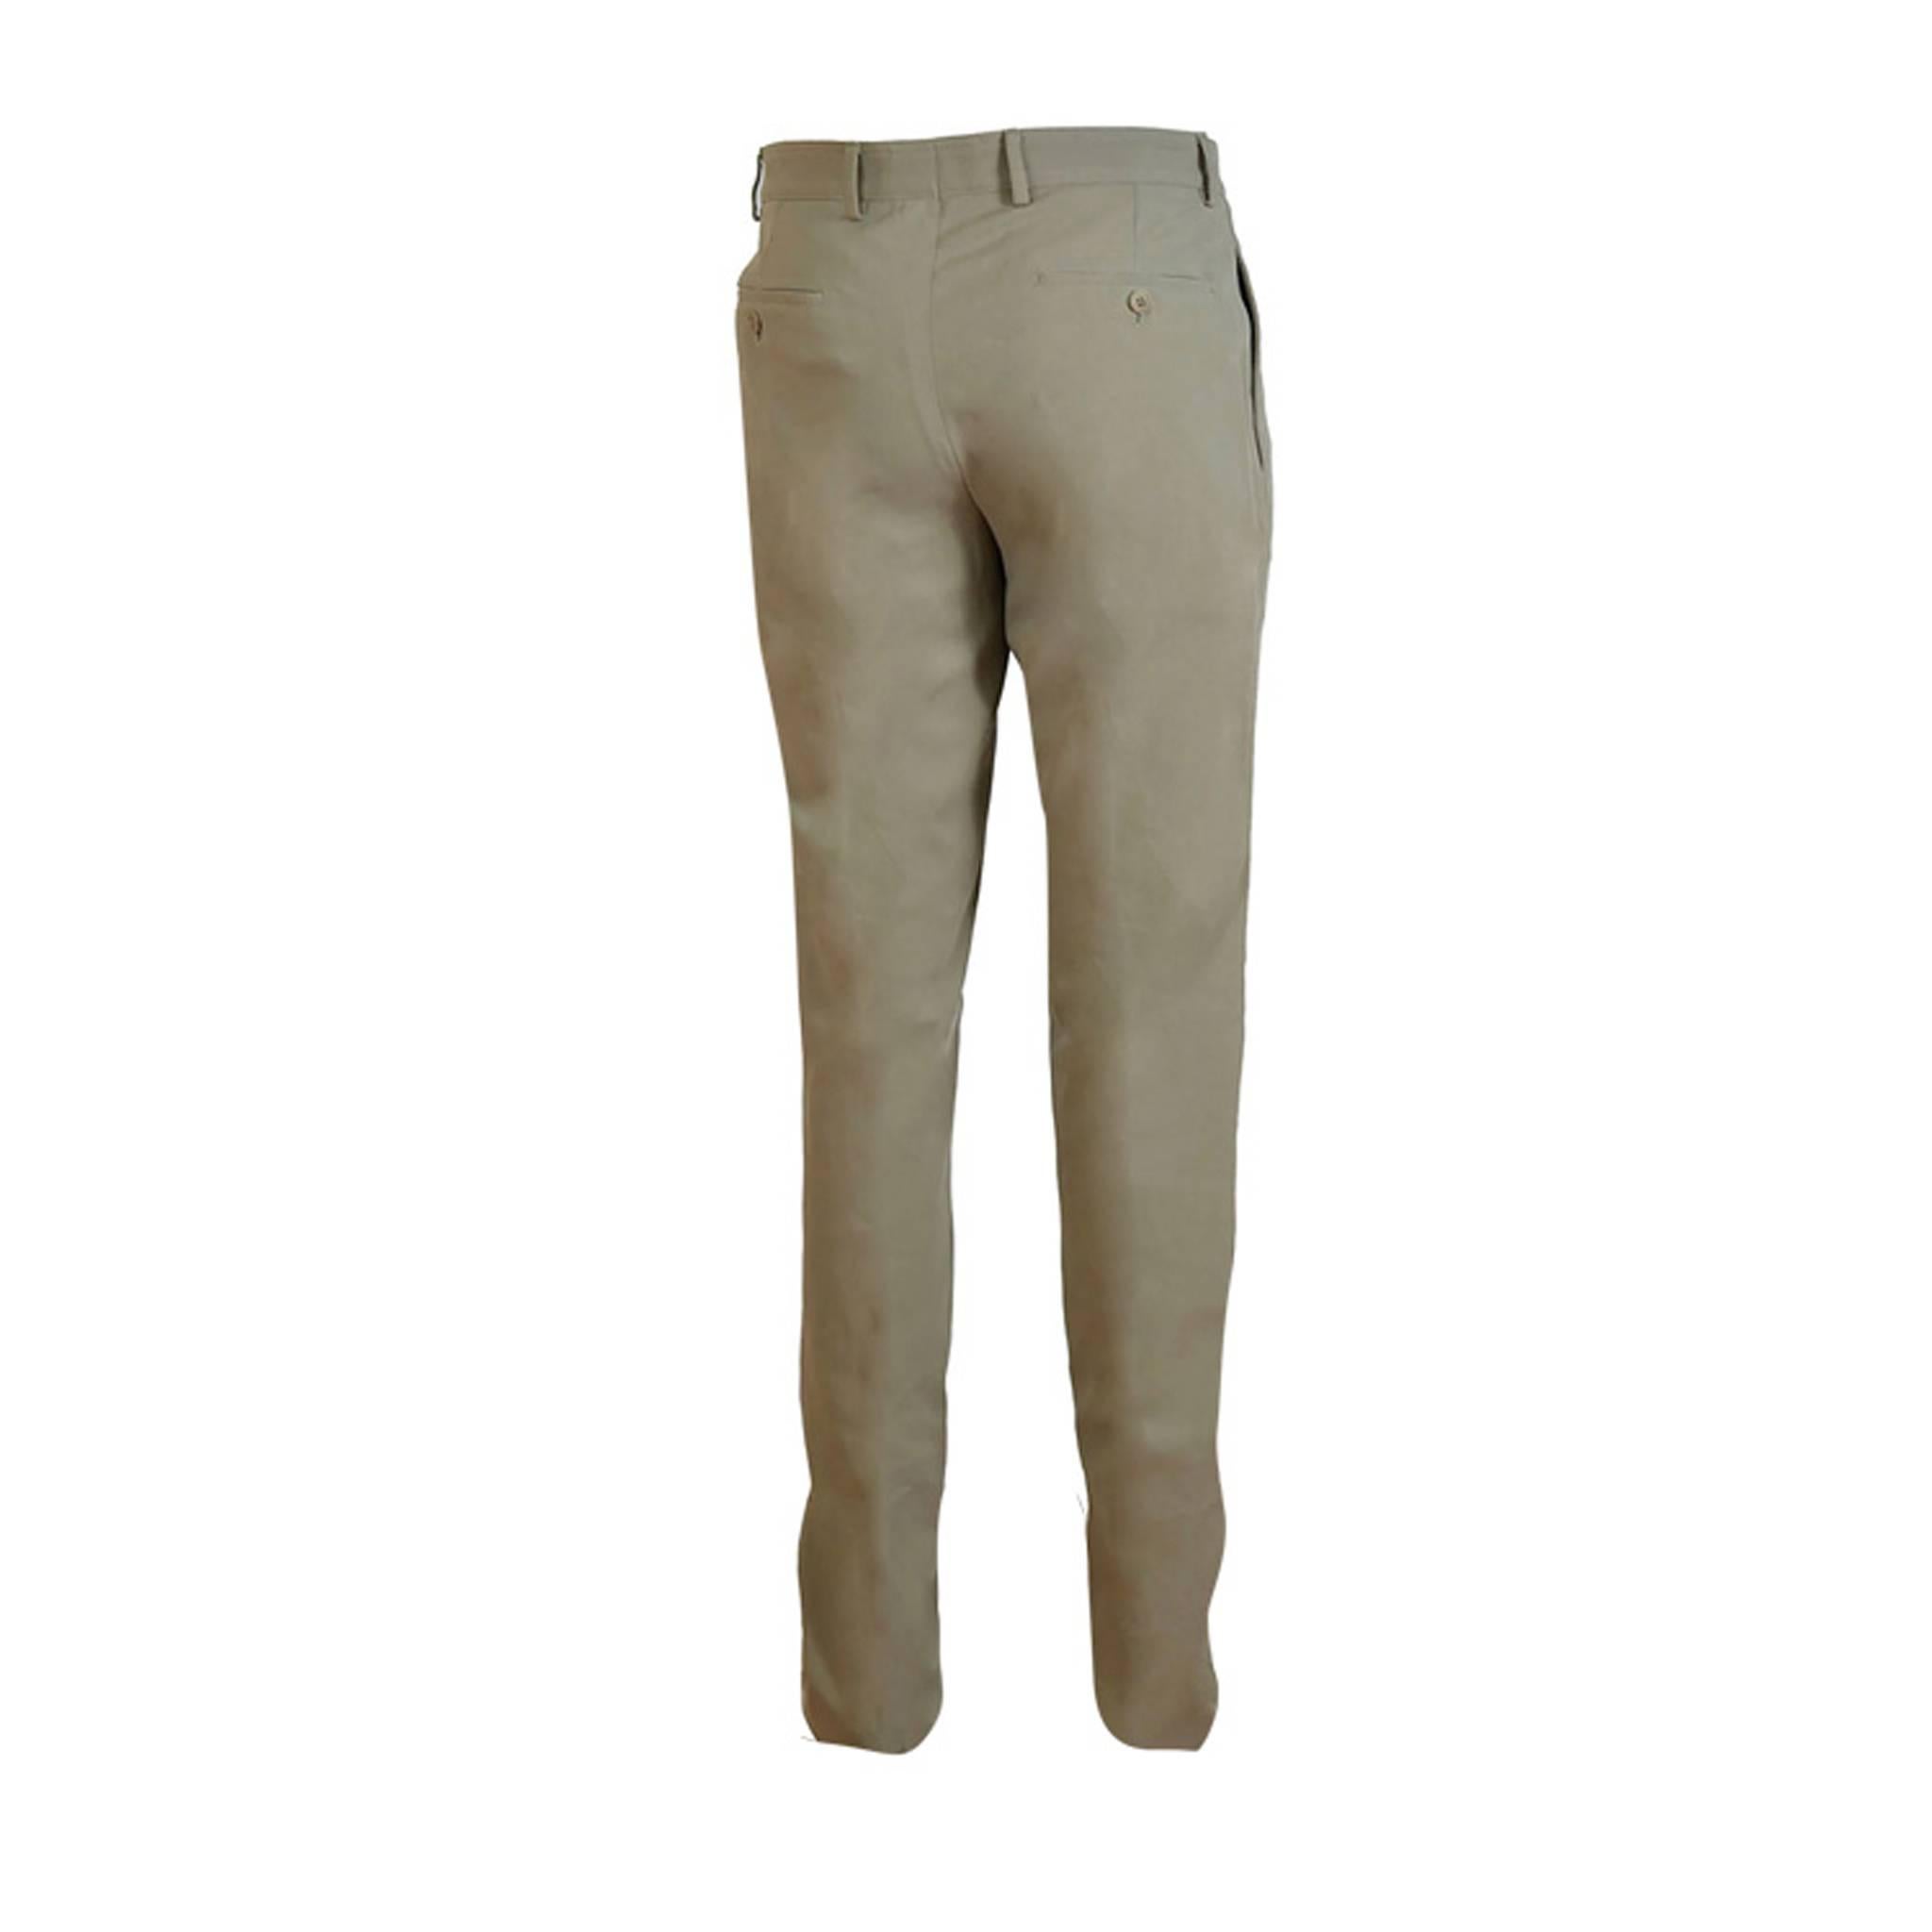 Hermes Pants Palm Beach Surpique Gabardine Sable Color Size 44.

Pre-owned and never used.

Bought it in hermes store in 2015.

Size: 44.

Color: Sable.

Model: Palm Beach Surpique Gabardine.



Details:

*Protective felt removed for purposes of